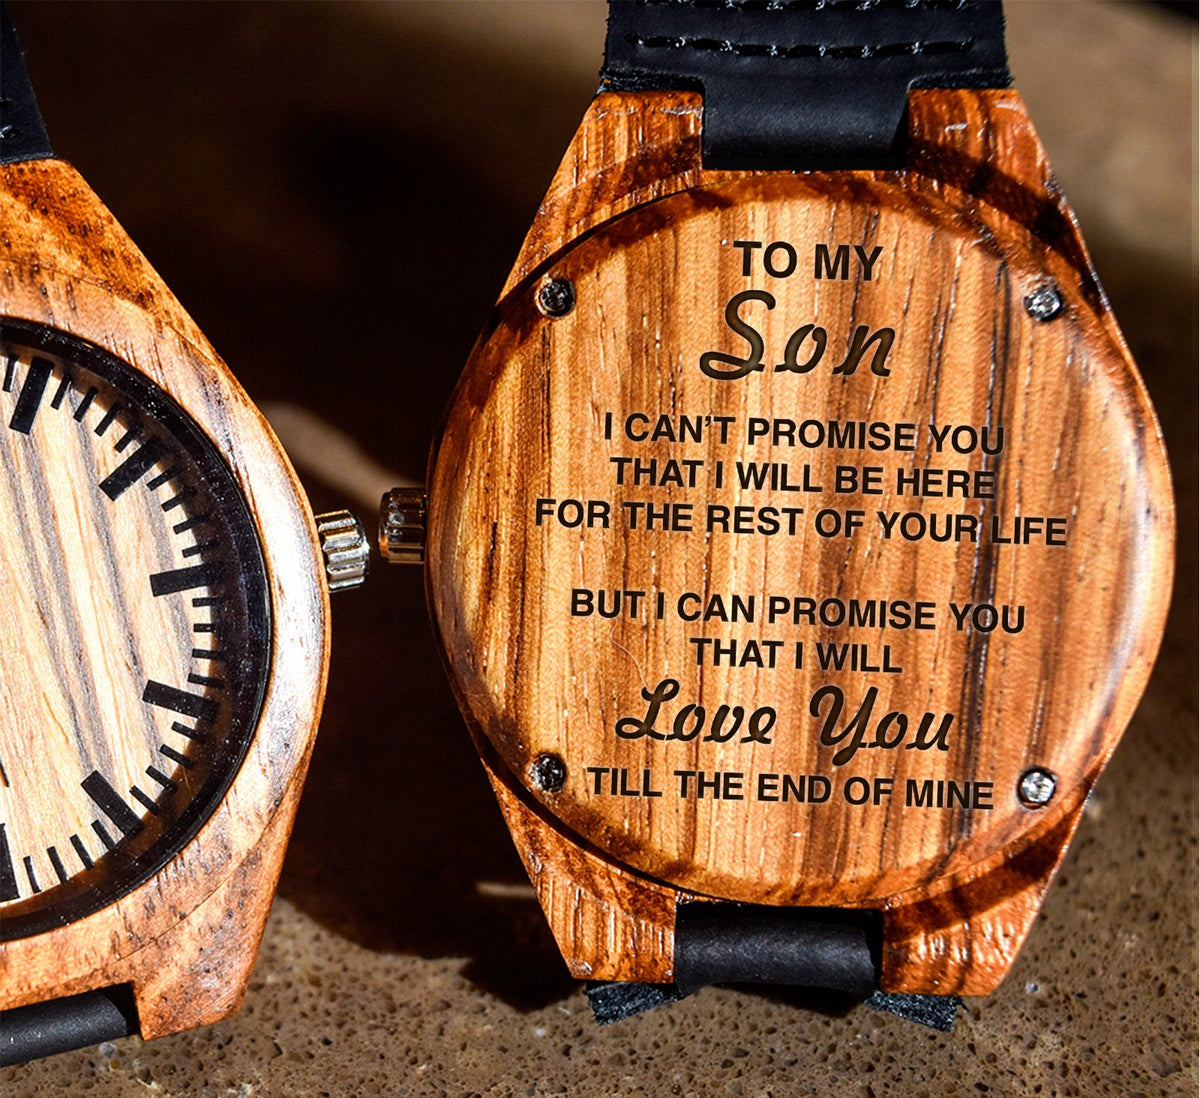 To My Son - I will Love You Till The End of Mine - Wooden Watch